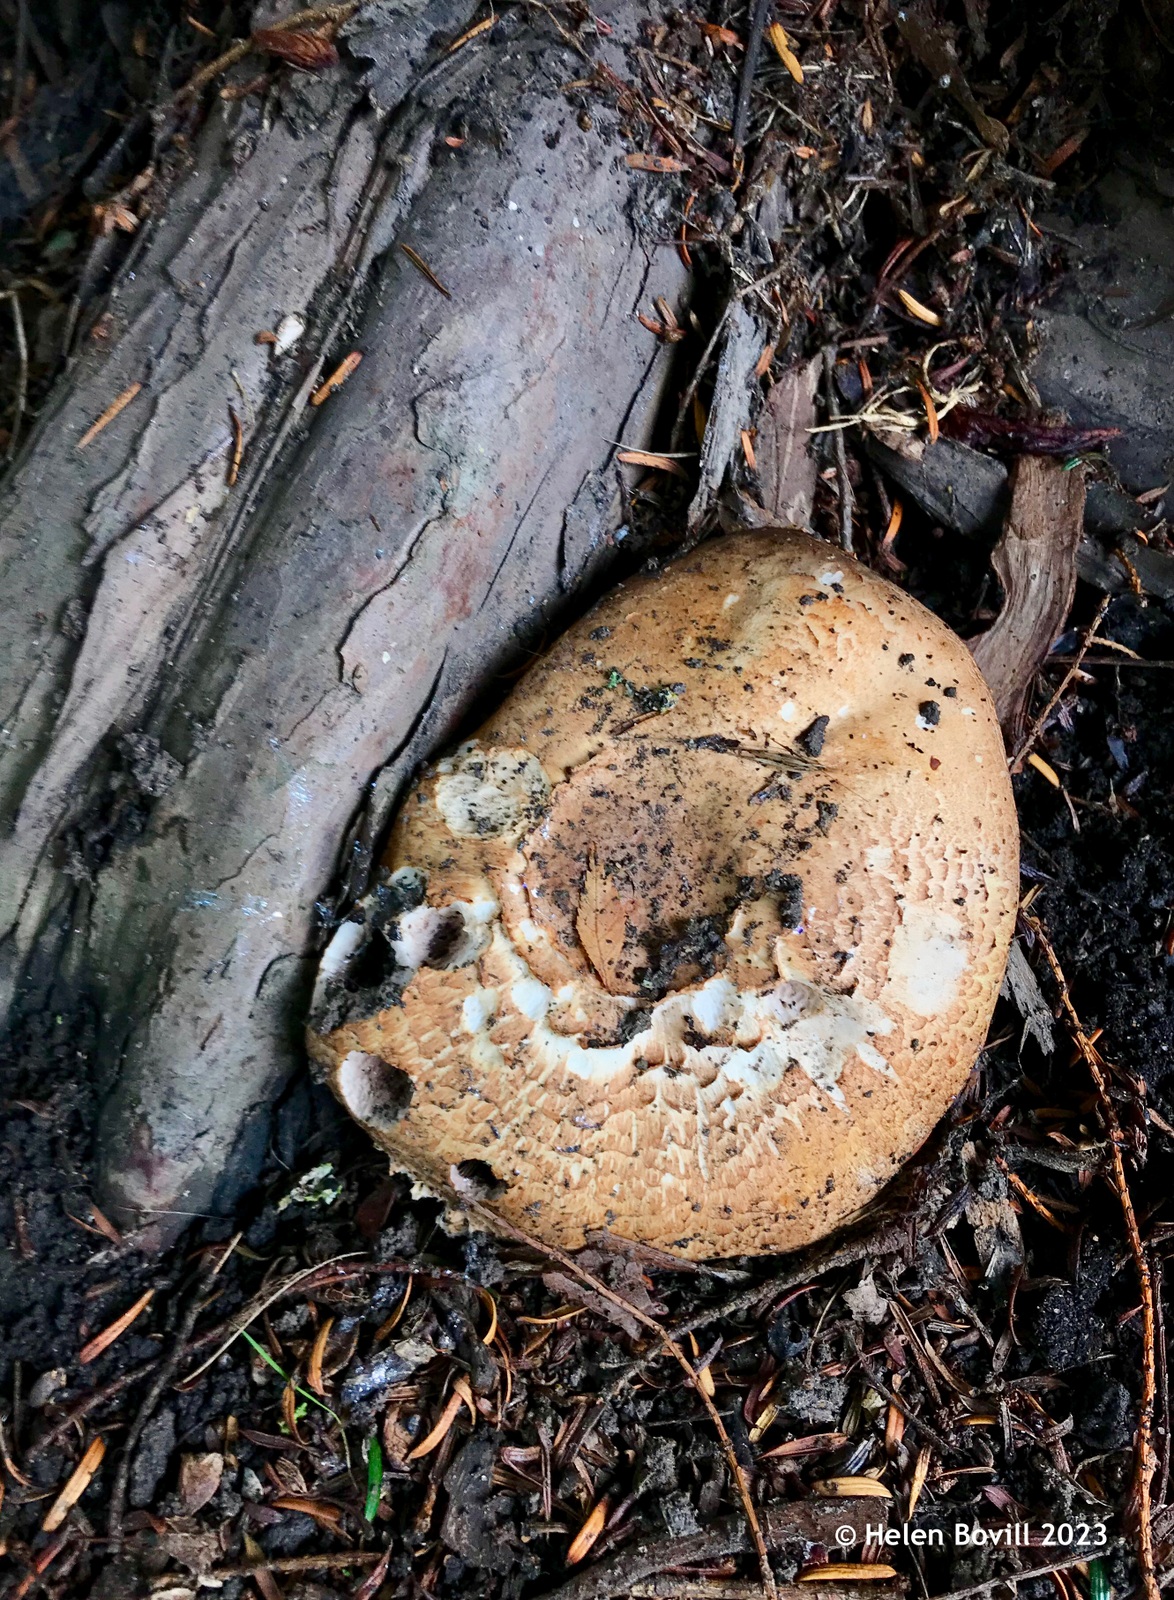 A partially eaten large brown fungus - Dryad's Saddle